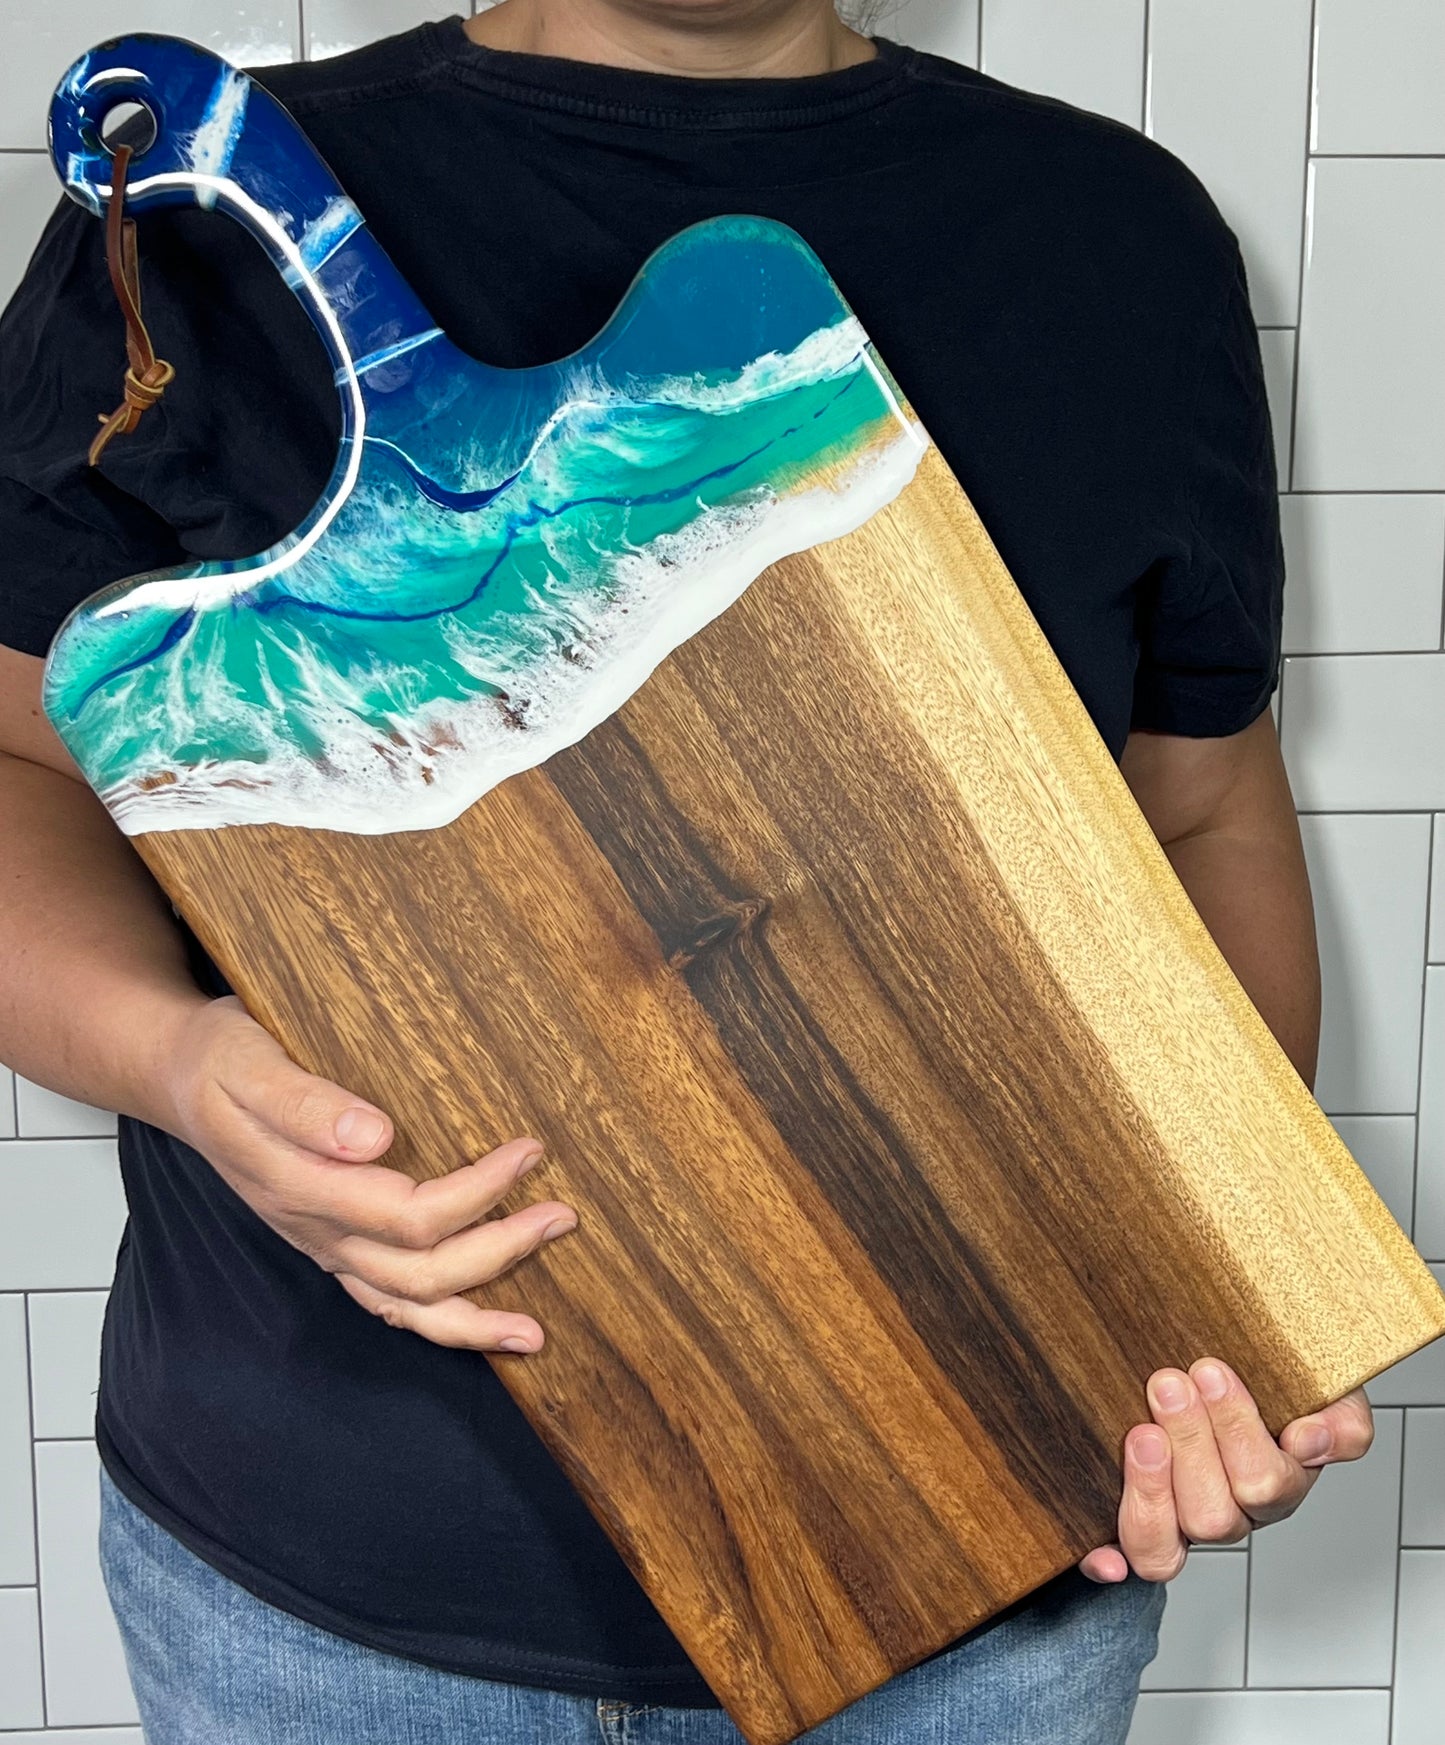 Ocean Inspired Live Edge Charcuterie Cheese Cutting Board: Walnut with Beach Blue & White Epoxy Resin. Gift for mom, foodies, beach lovers